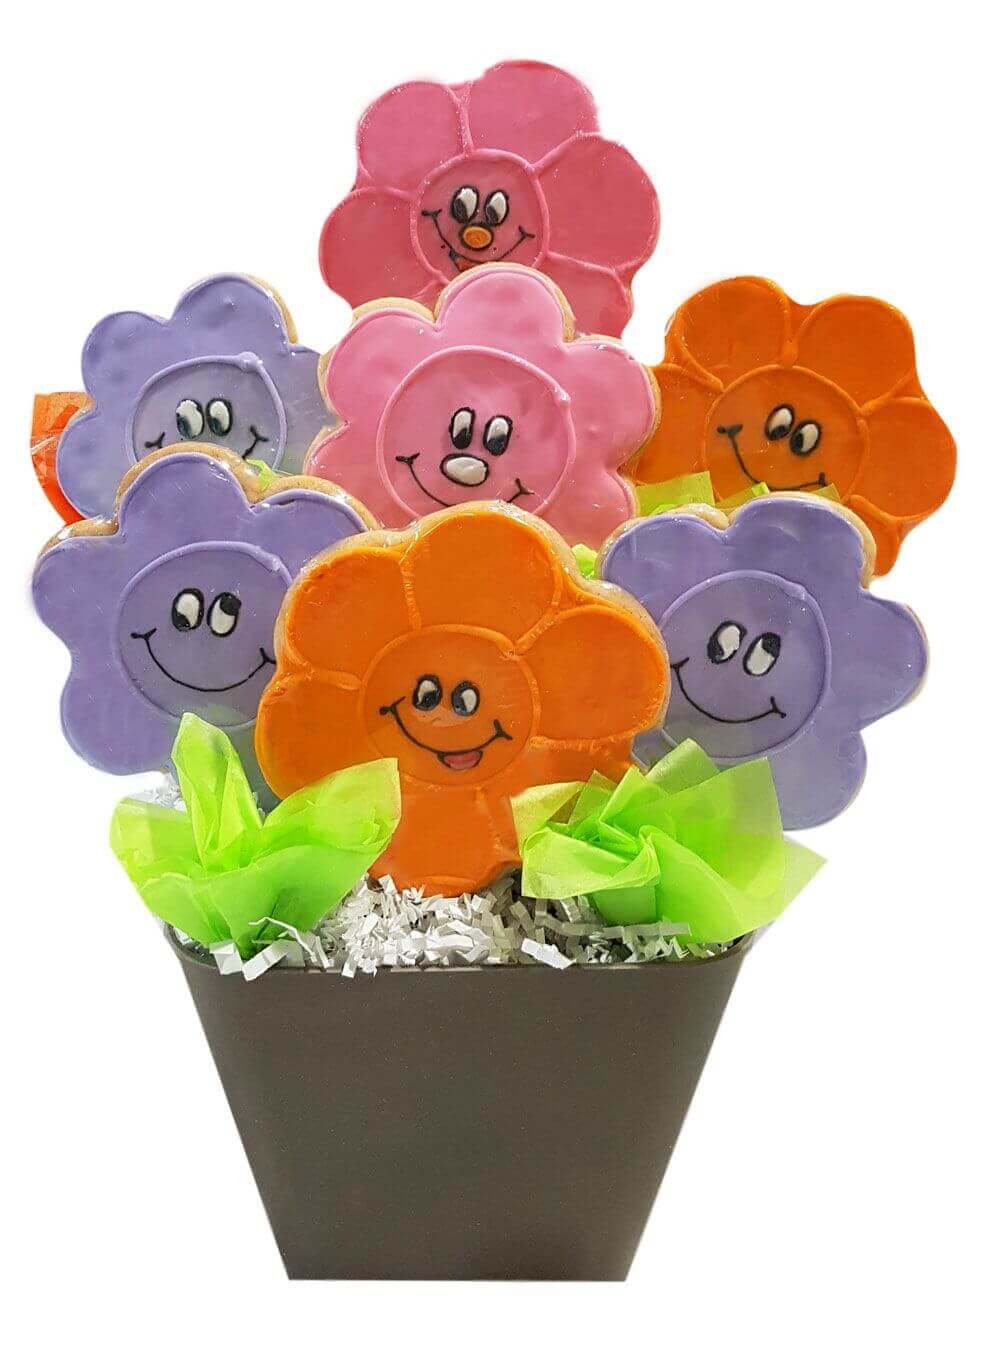 The Crazy Daisies Cookie Bouquet - Put a smile on anyone's face!